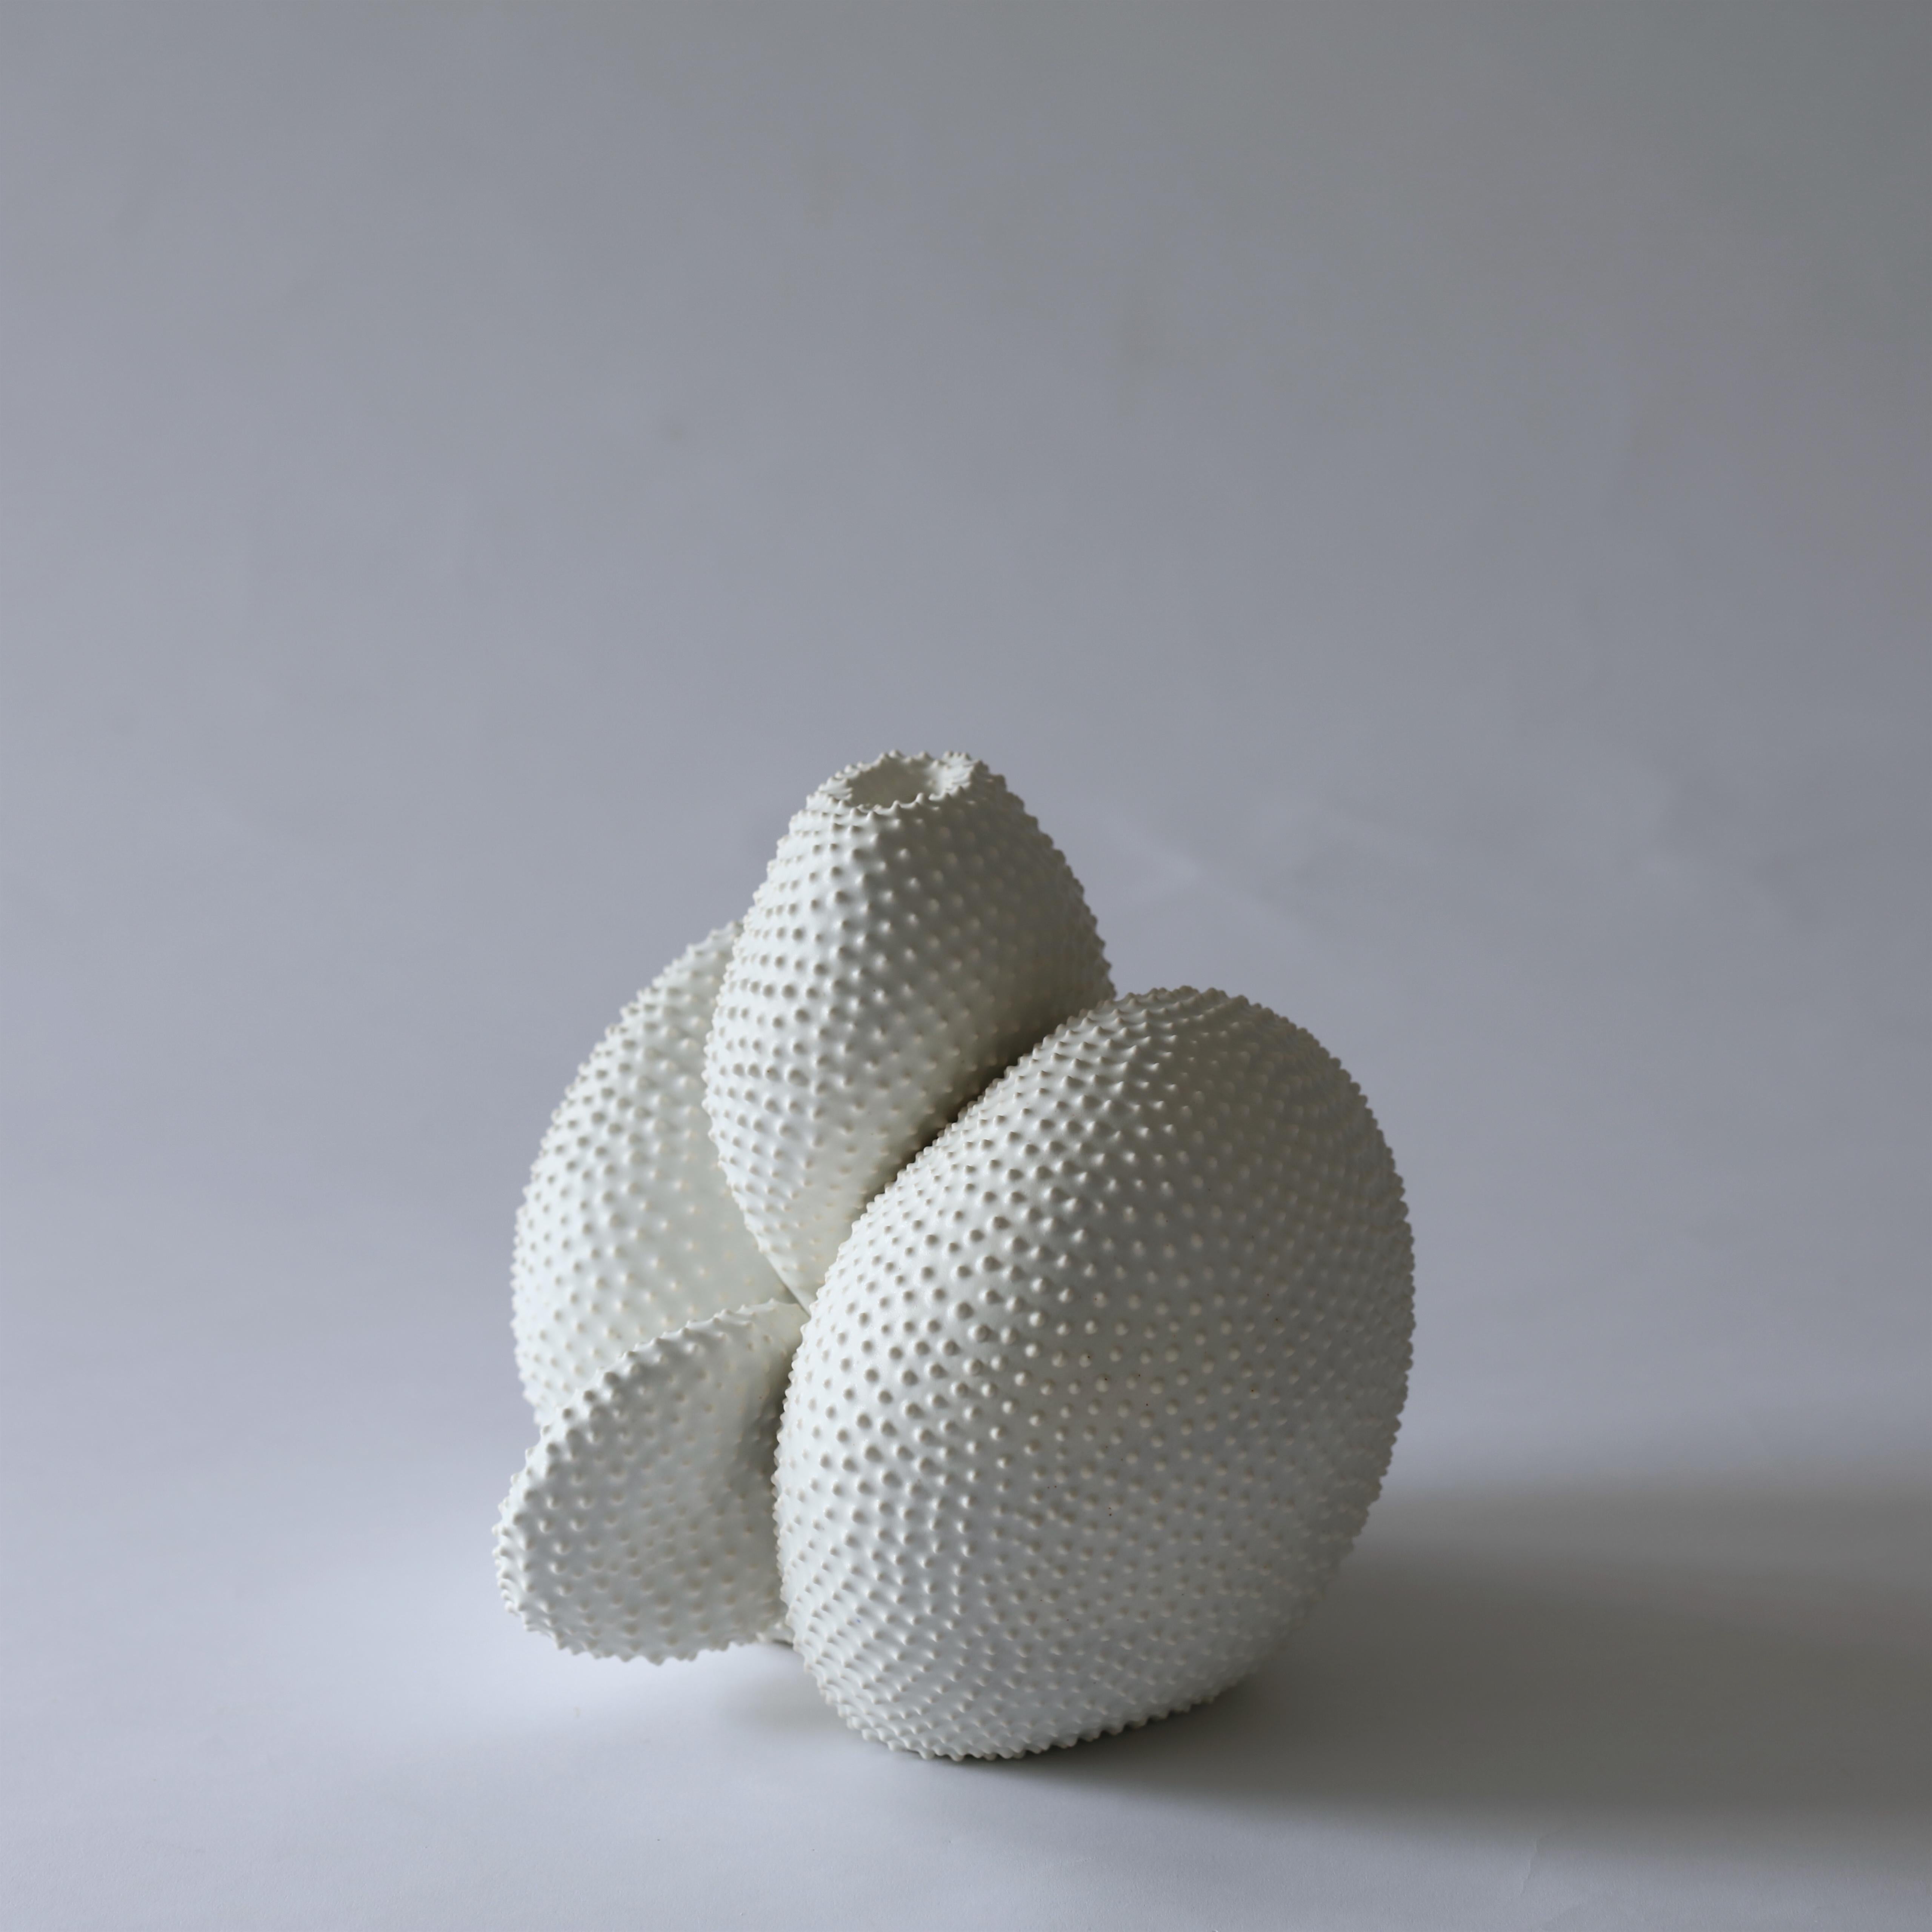 Cactus Vessel I, 2023, (Ceramic, C. 7.9 in. h x 8.7 in. w x 8.5 in. d, Object No.: 4168)

There is a clear connection between the consistency that Skov Madsen establishes in her research of surfaces, material and ornamentalism, and her efforts that